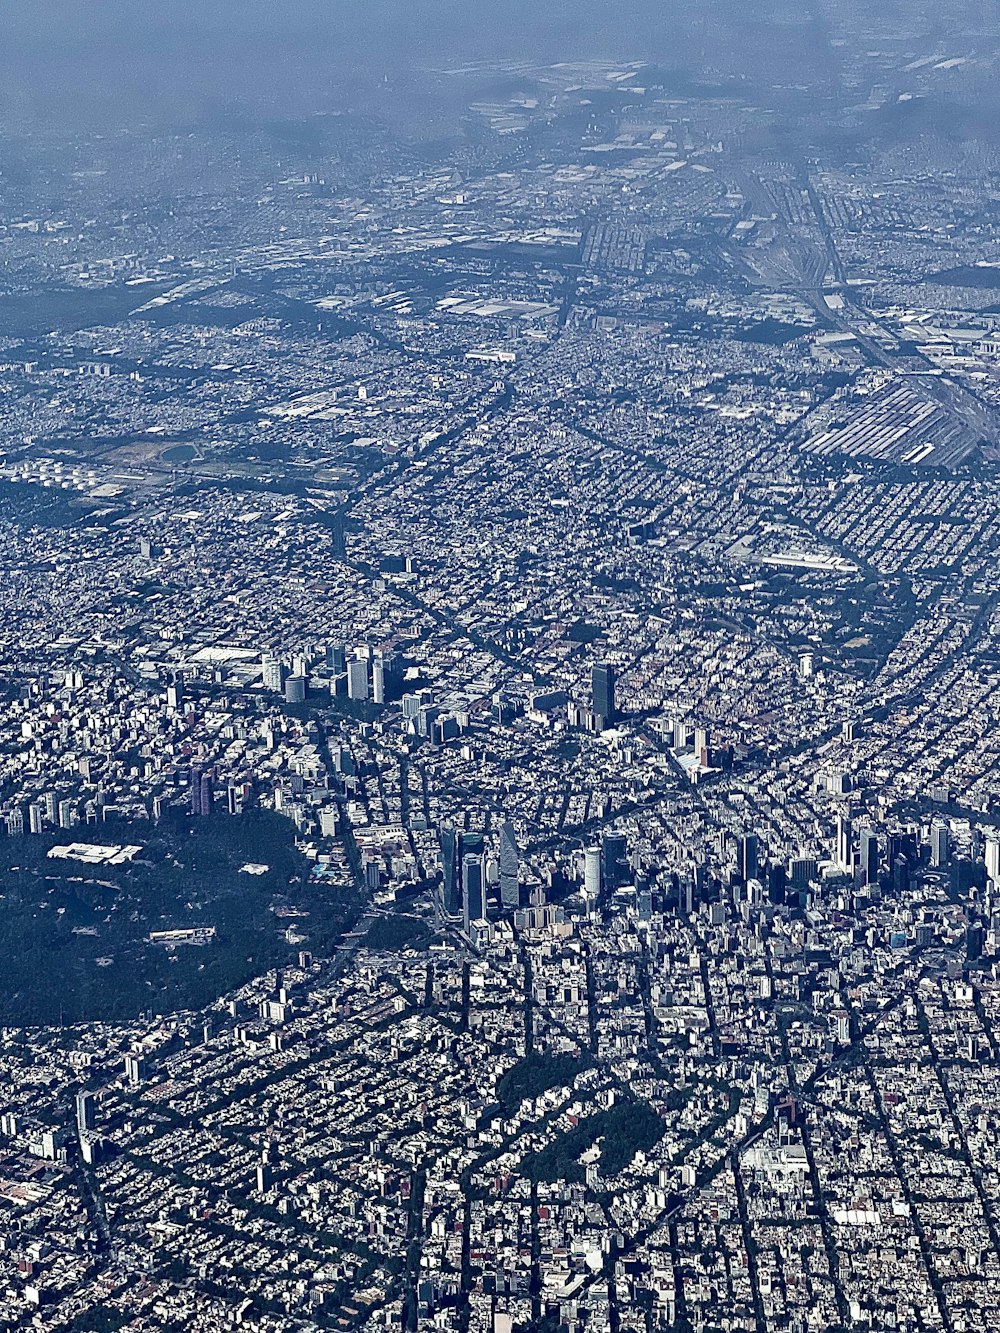 an aerial view of a city from an airplane